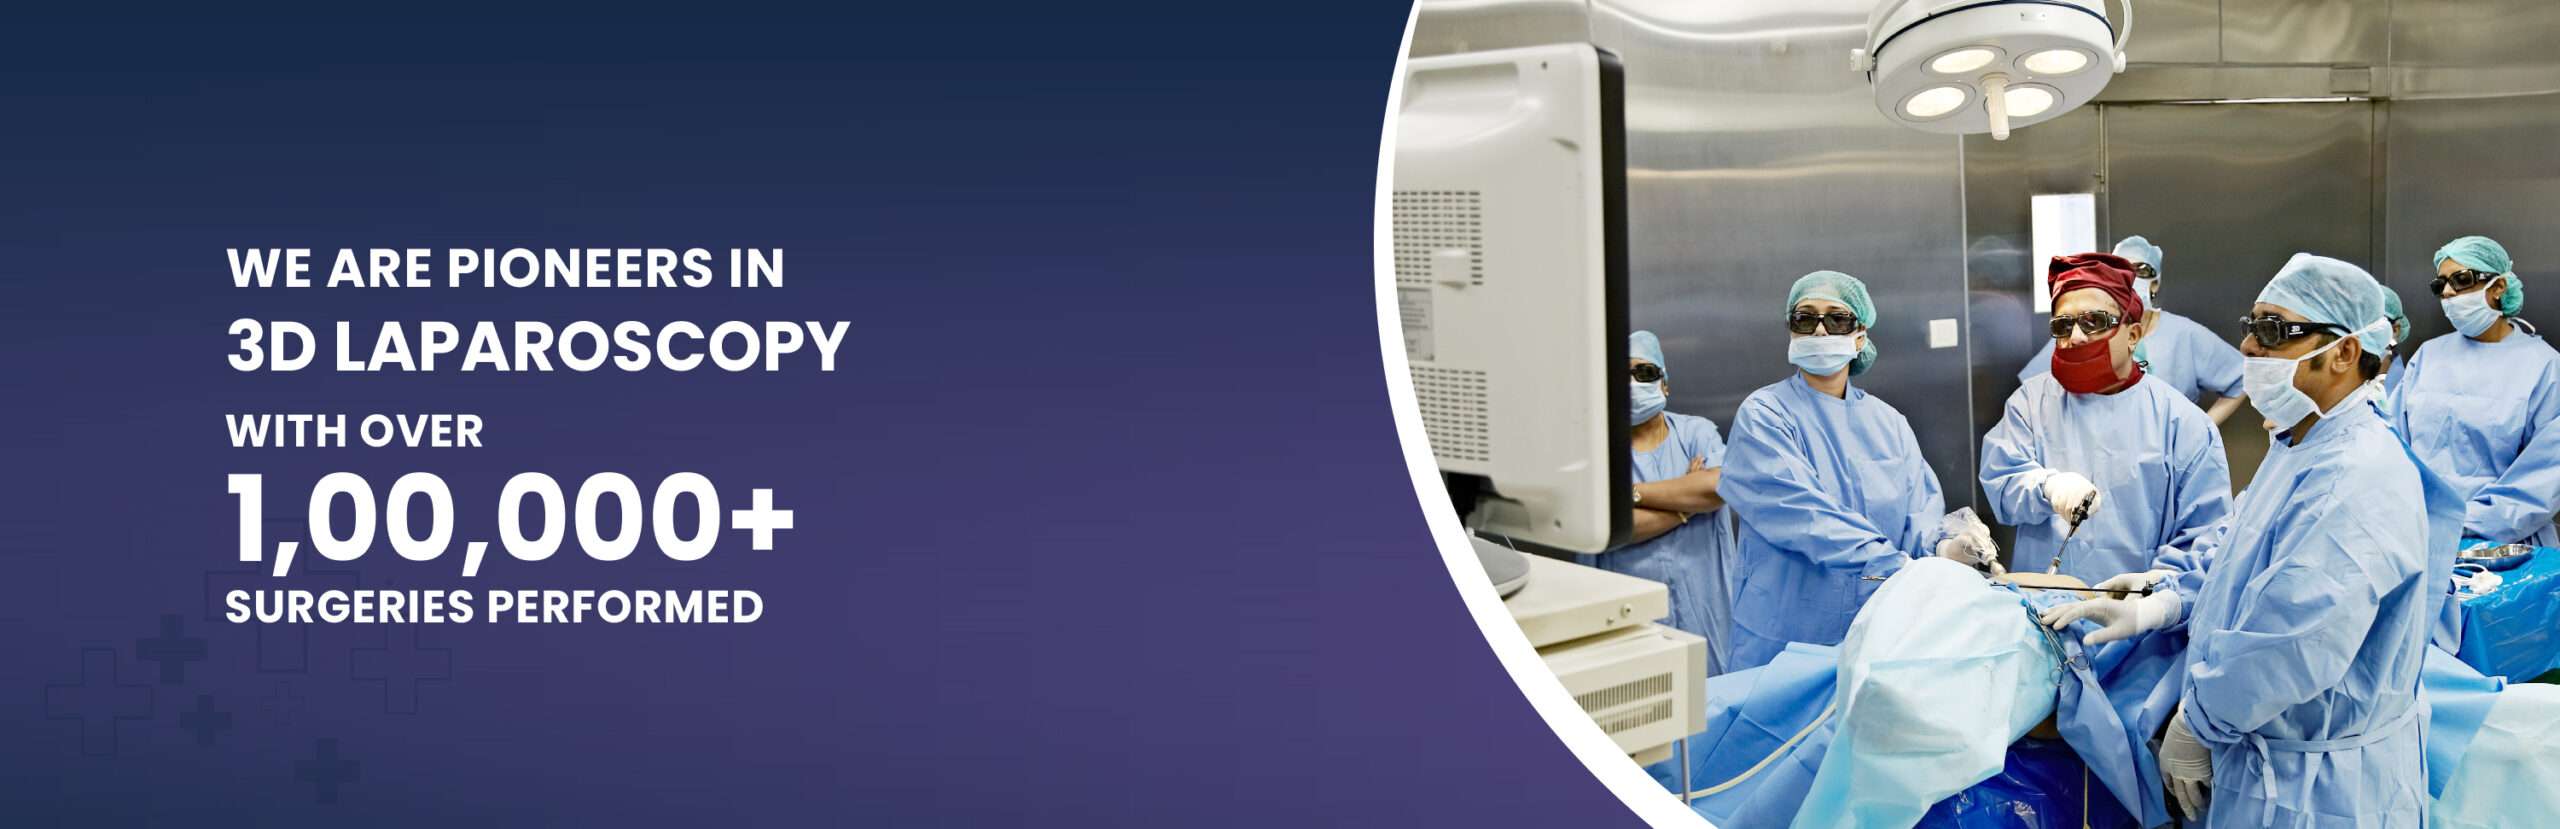 Image shows Altius has experience performing 1 lakh plus laproscopic surgeries and are experts in the field